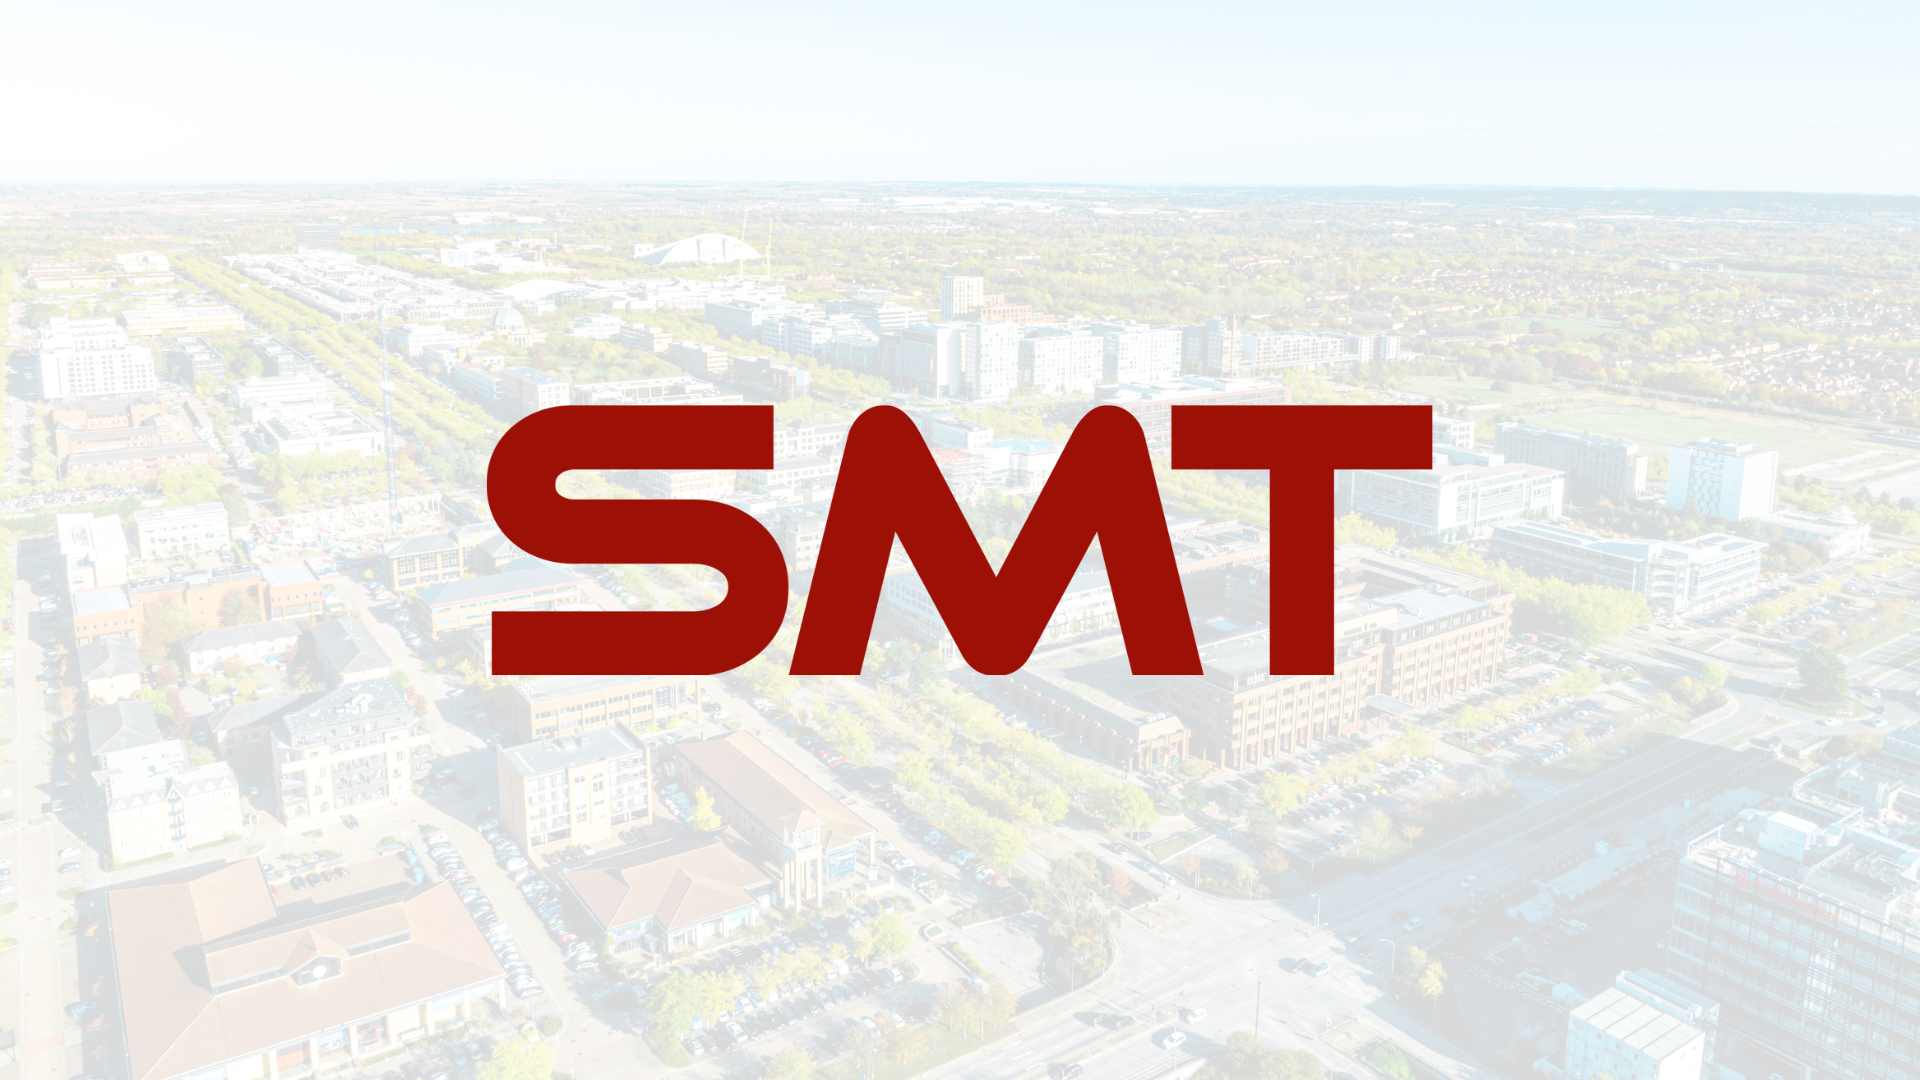 Milton Keynes cityscape with SMT logo in forefront.